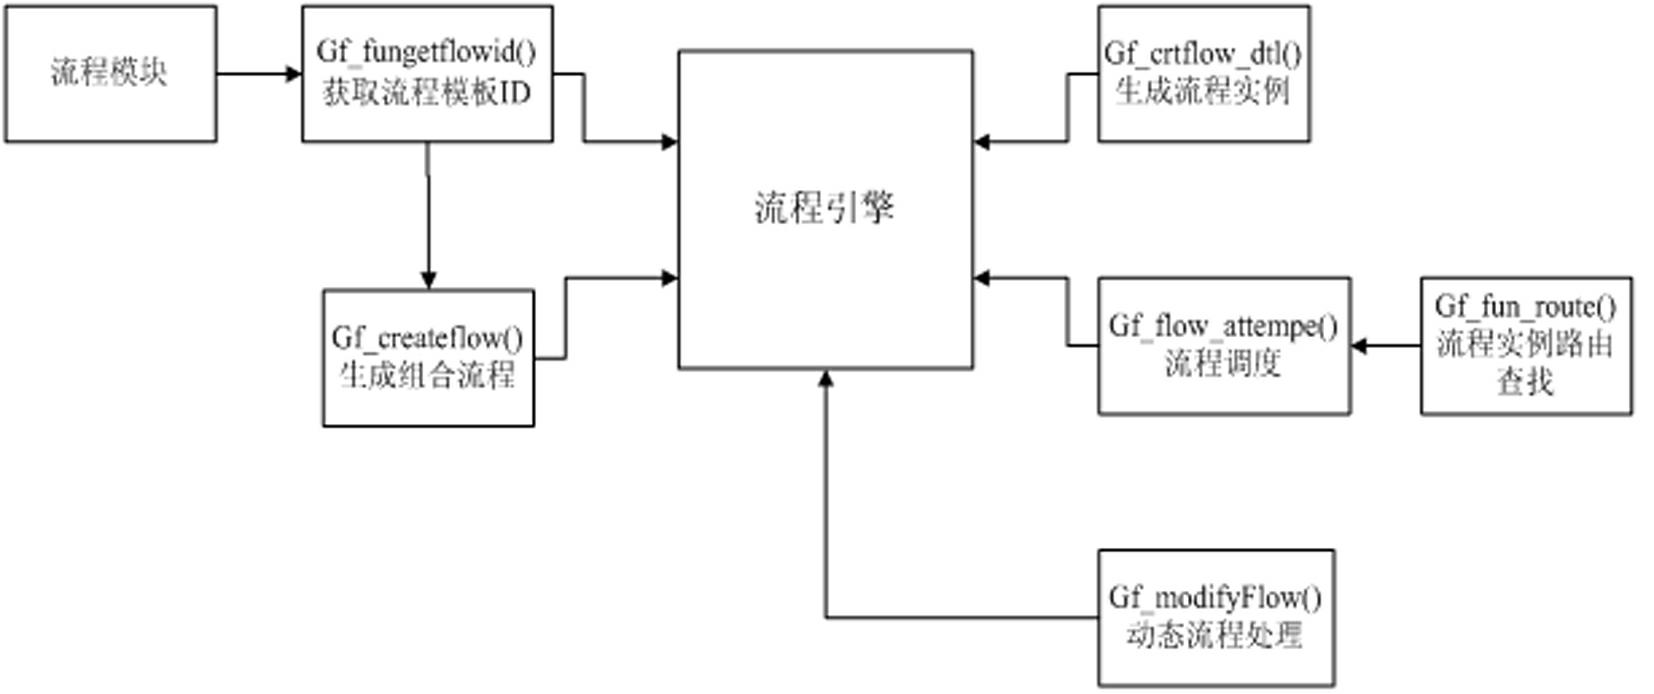 Implementation method and system of flow engine based on dynamic business